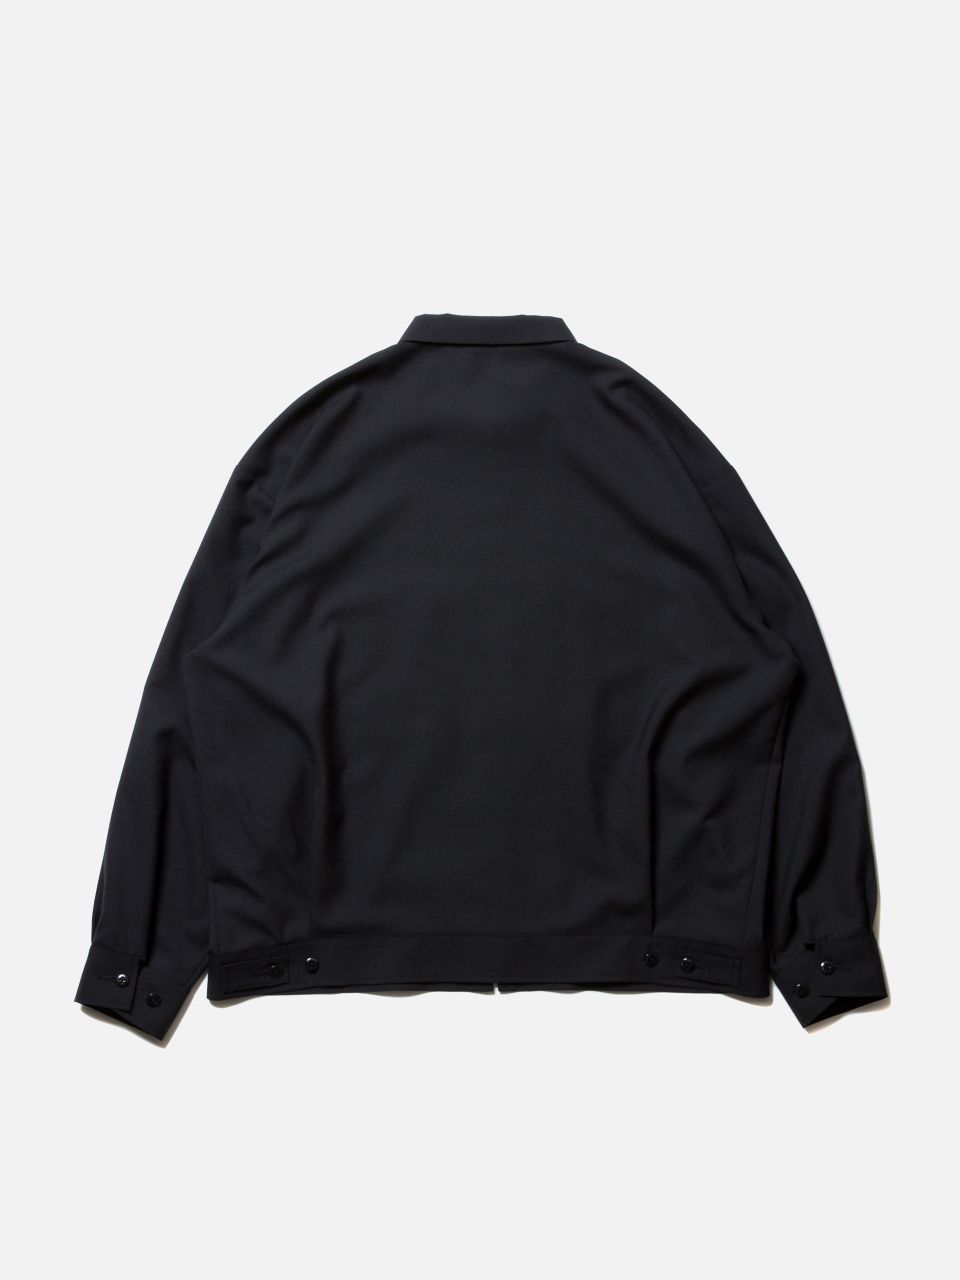 COOTIE クーティ 通販 19AW T/W Work Jacket